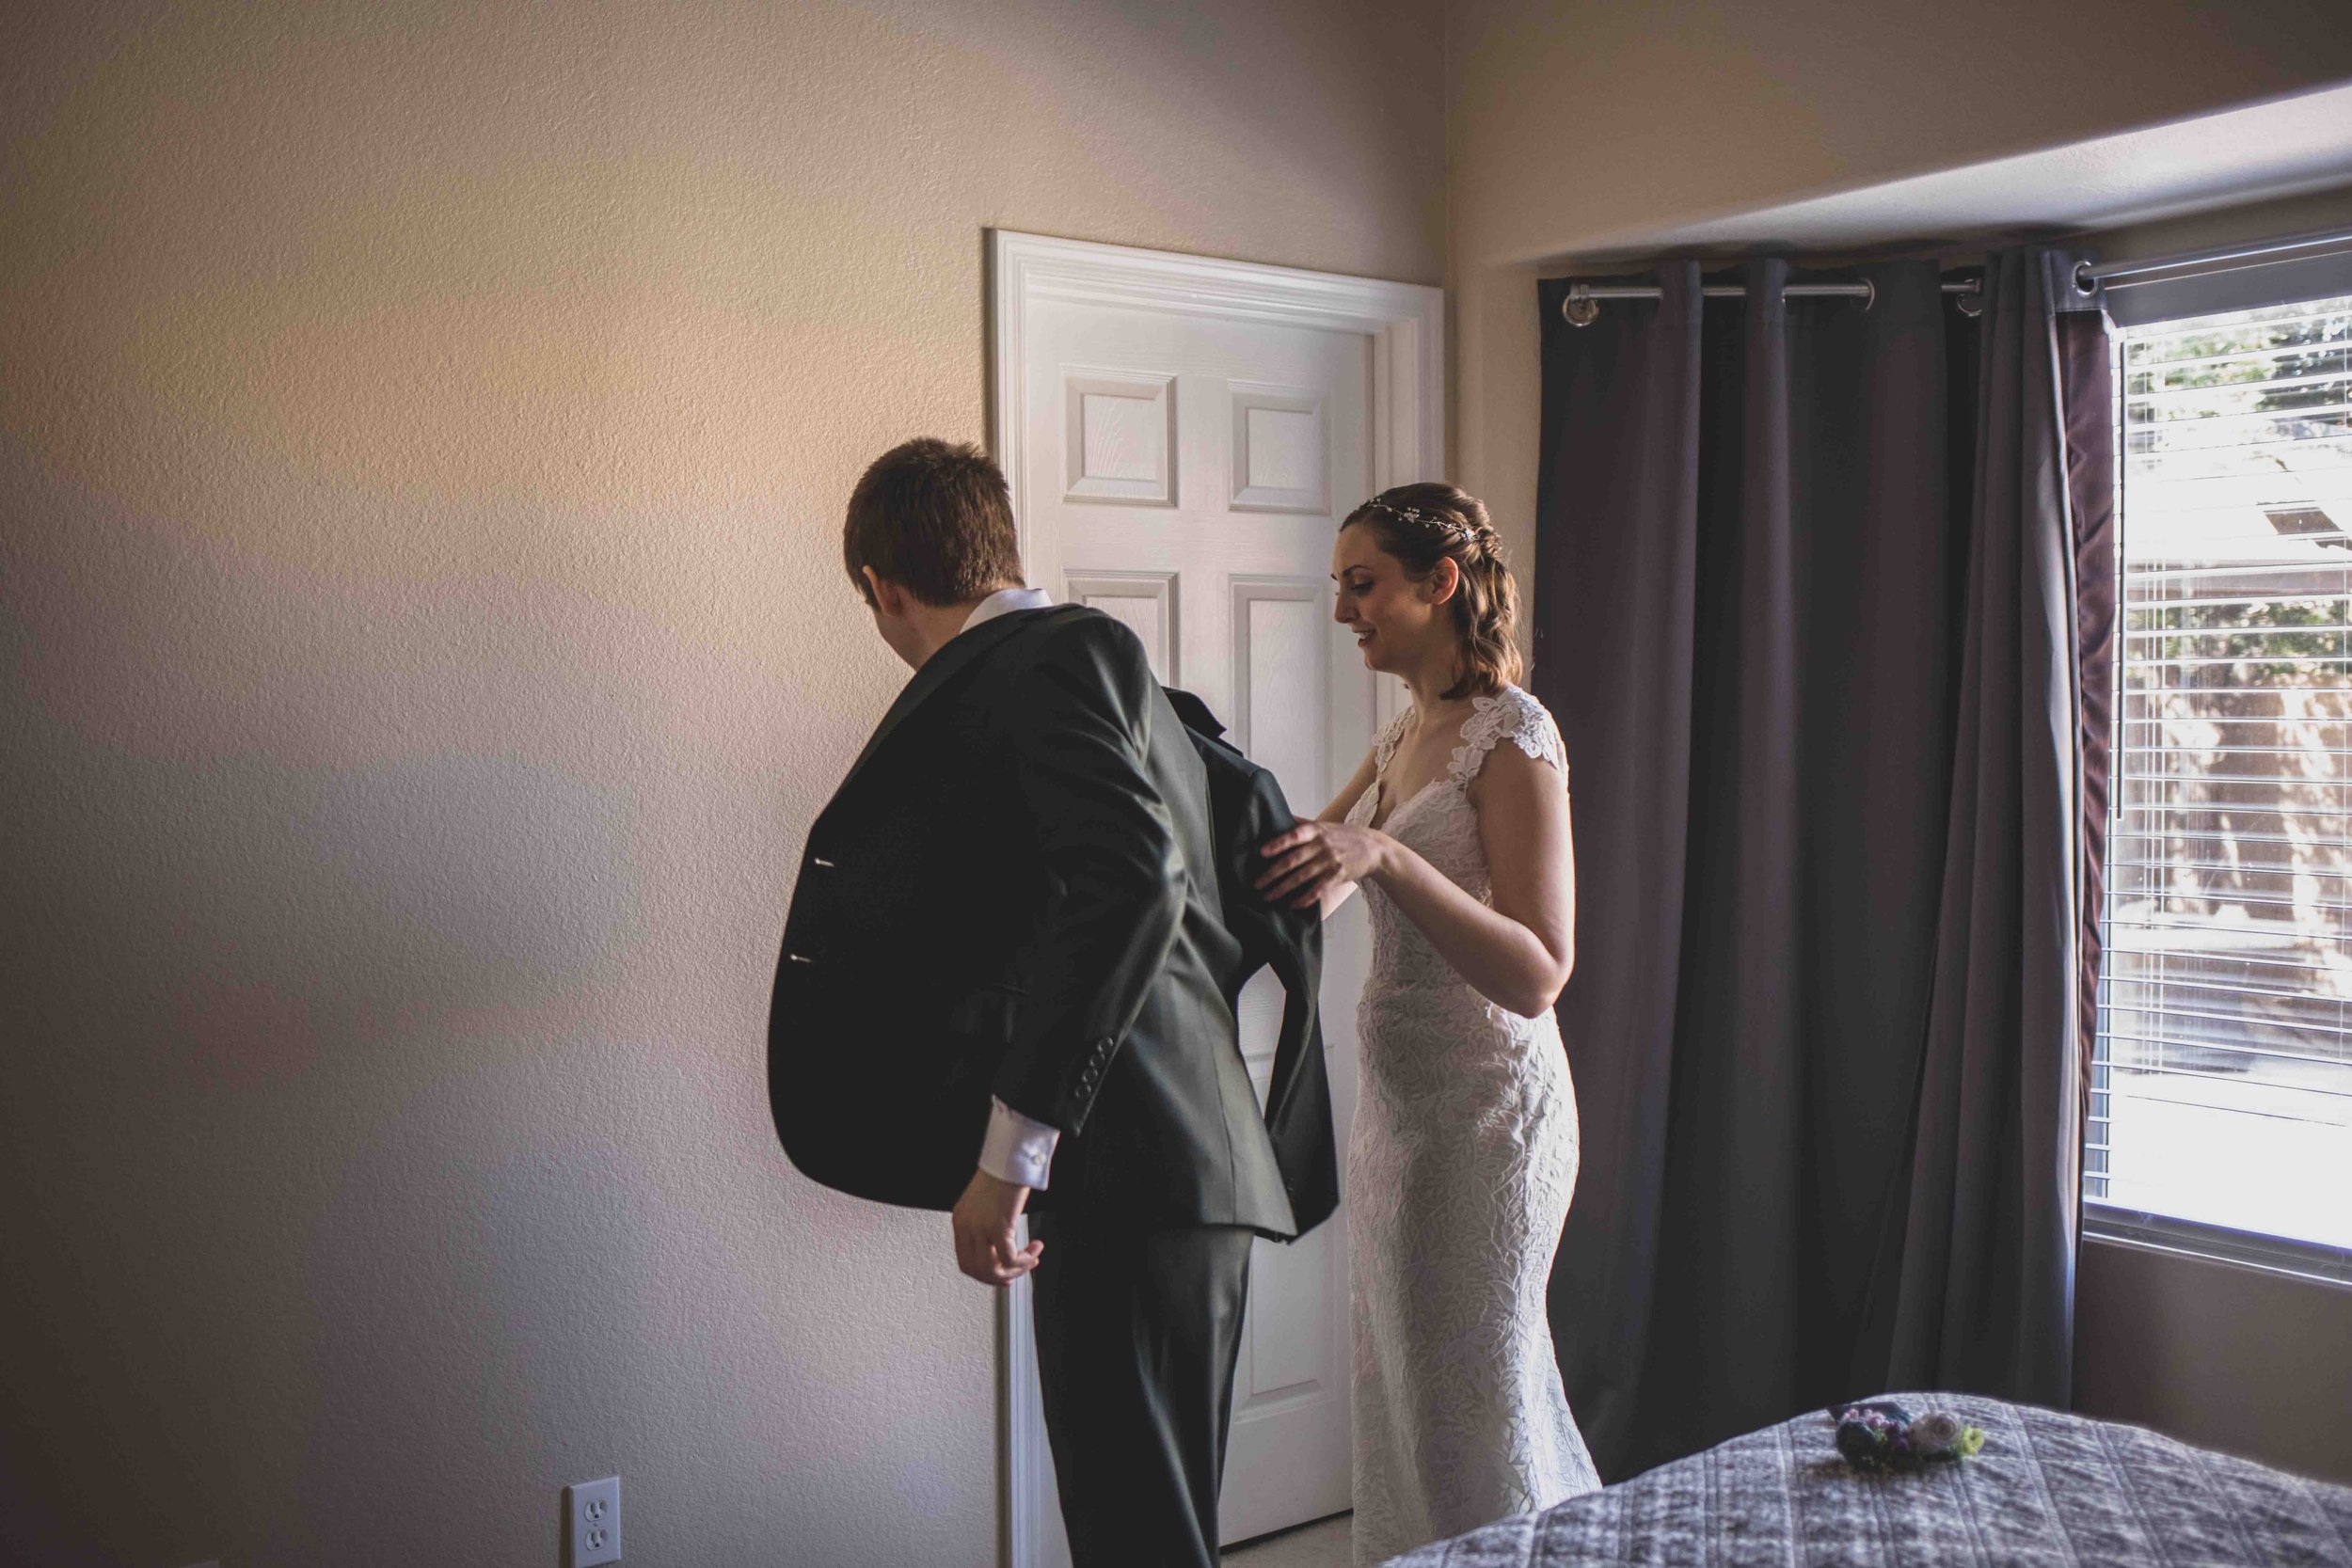 Bride and Groom getting ready together for their wedding day at home by Gilbert, Arizona Wedding Photographer Jennifer Lind Schutsky.